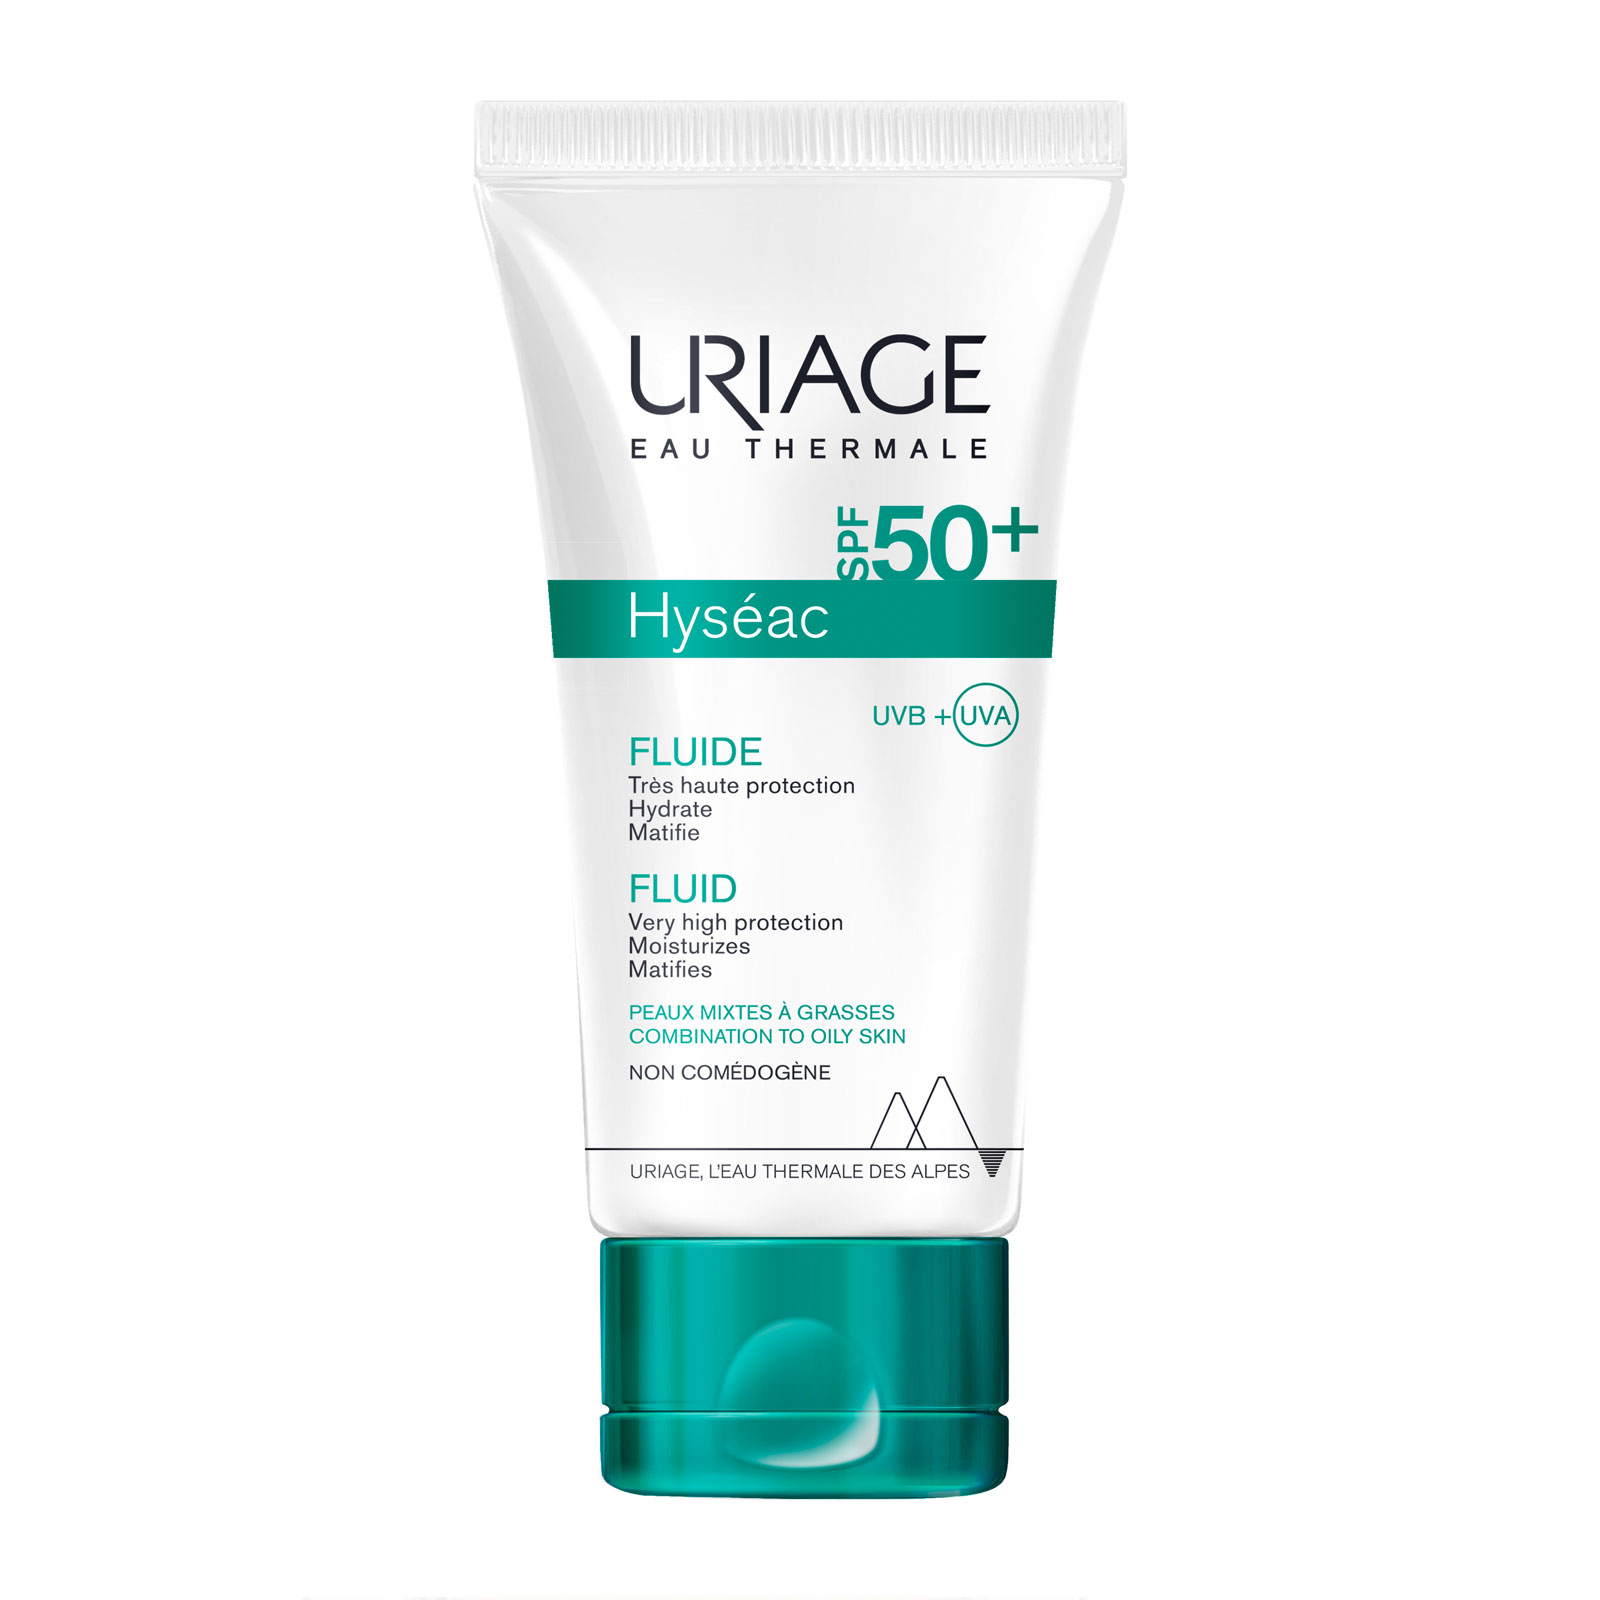 Uriage Hyseac High Protection Emulsion For Combination To Oily Skin Spf50+ 50Ml